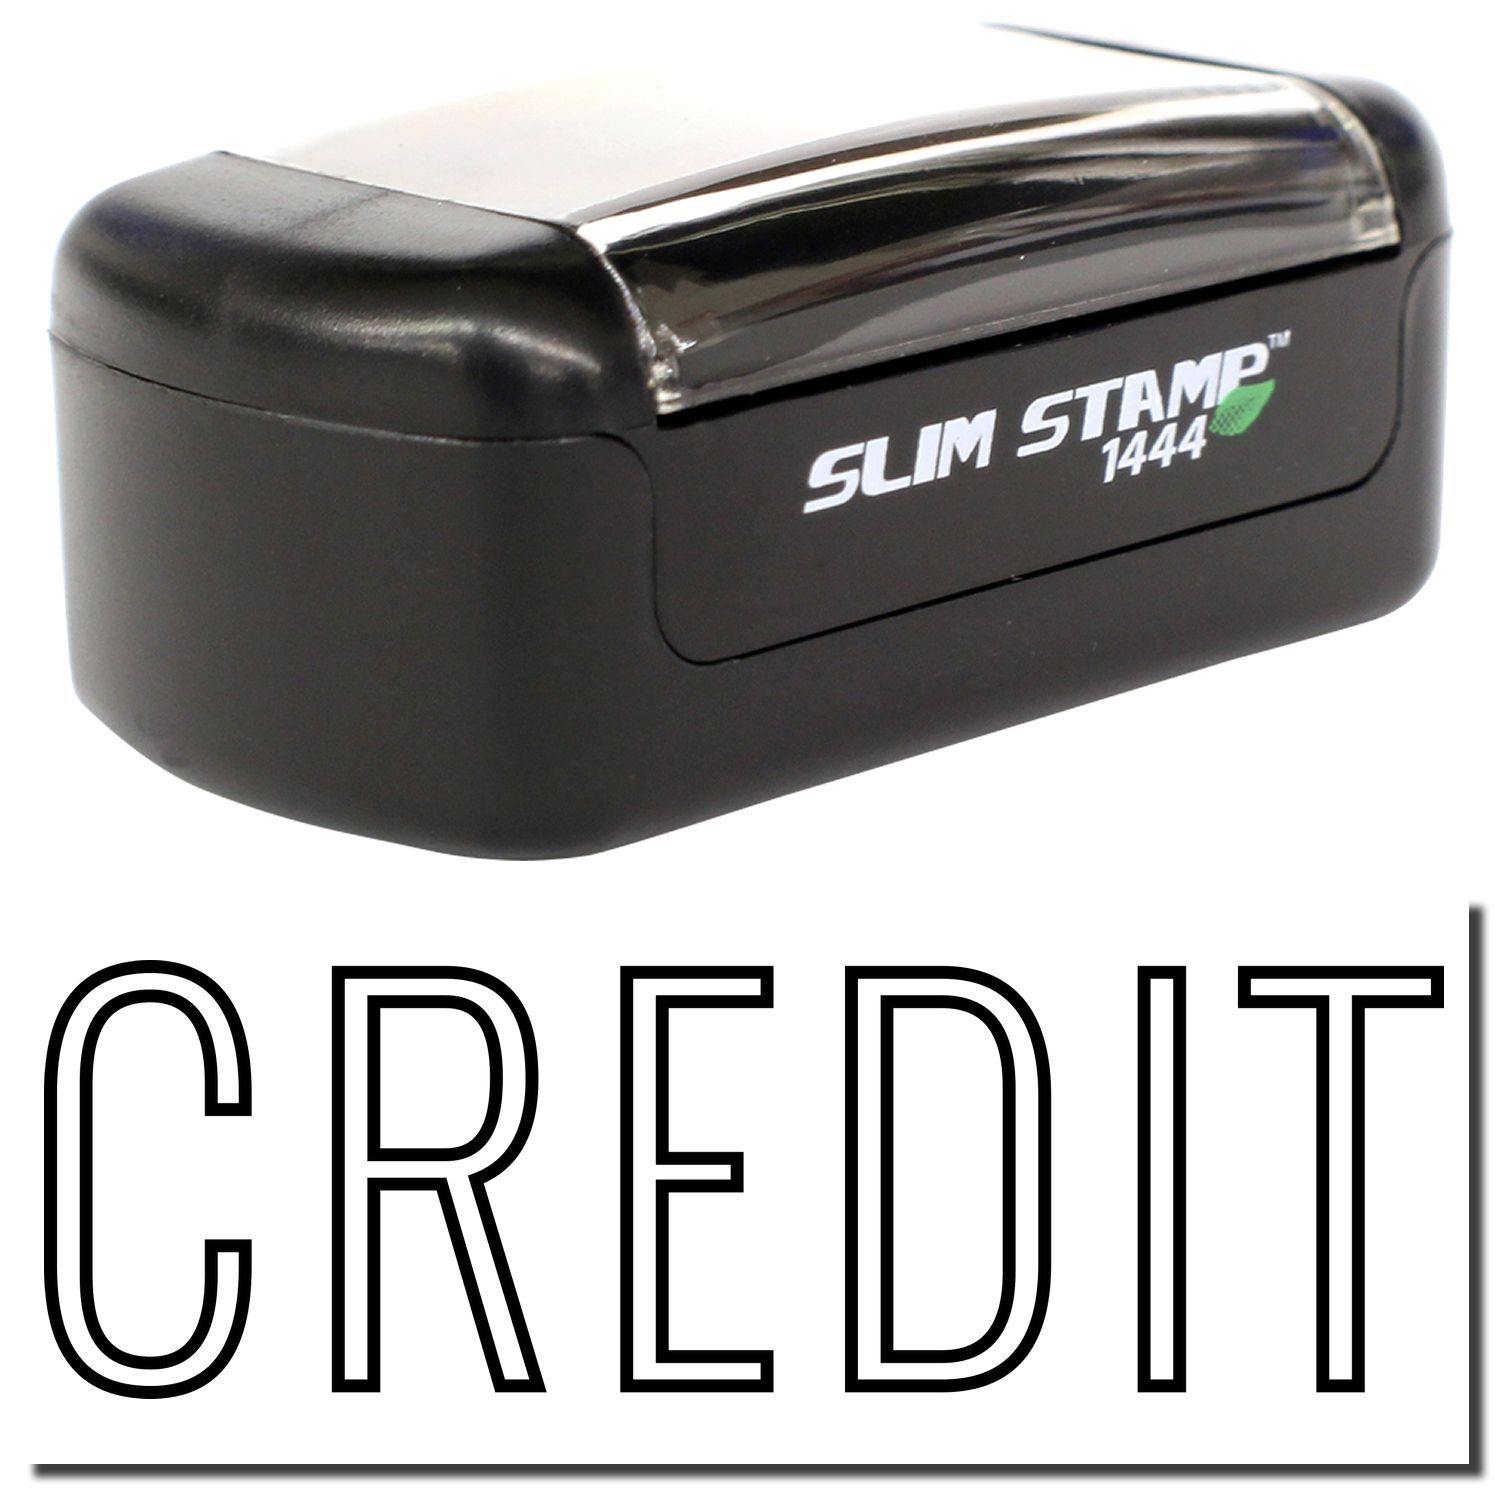 A stock office pre-inked stamp with a stamped image showing how the text "CREDIT" in an outline font is displayed after stamping.